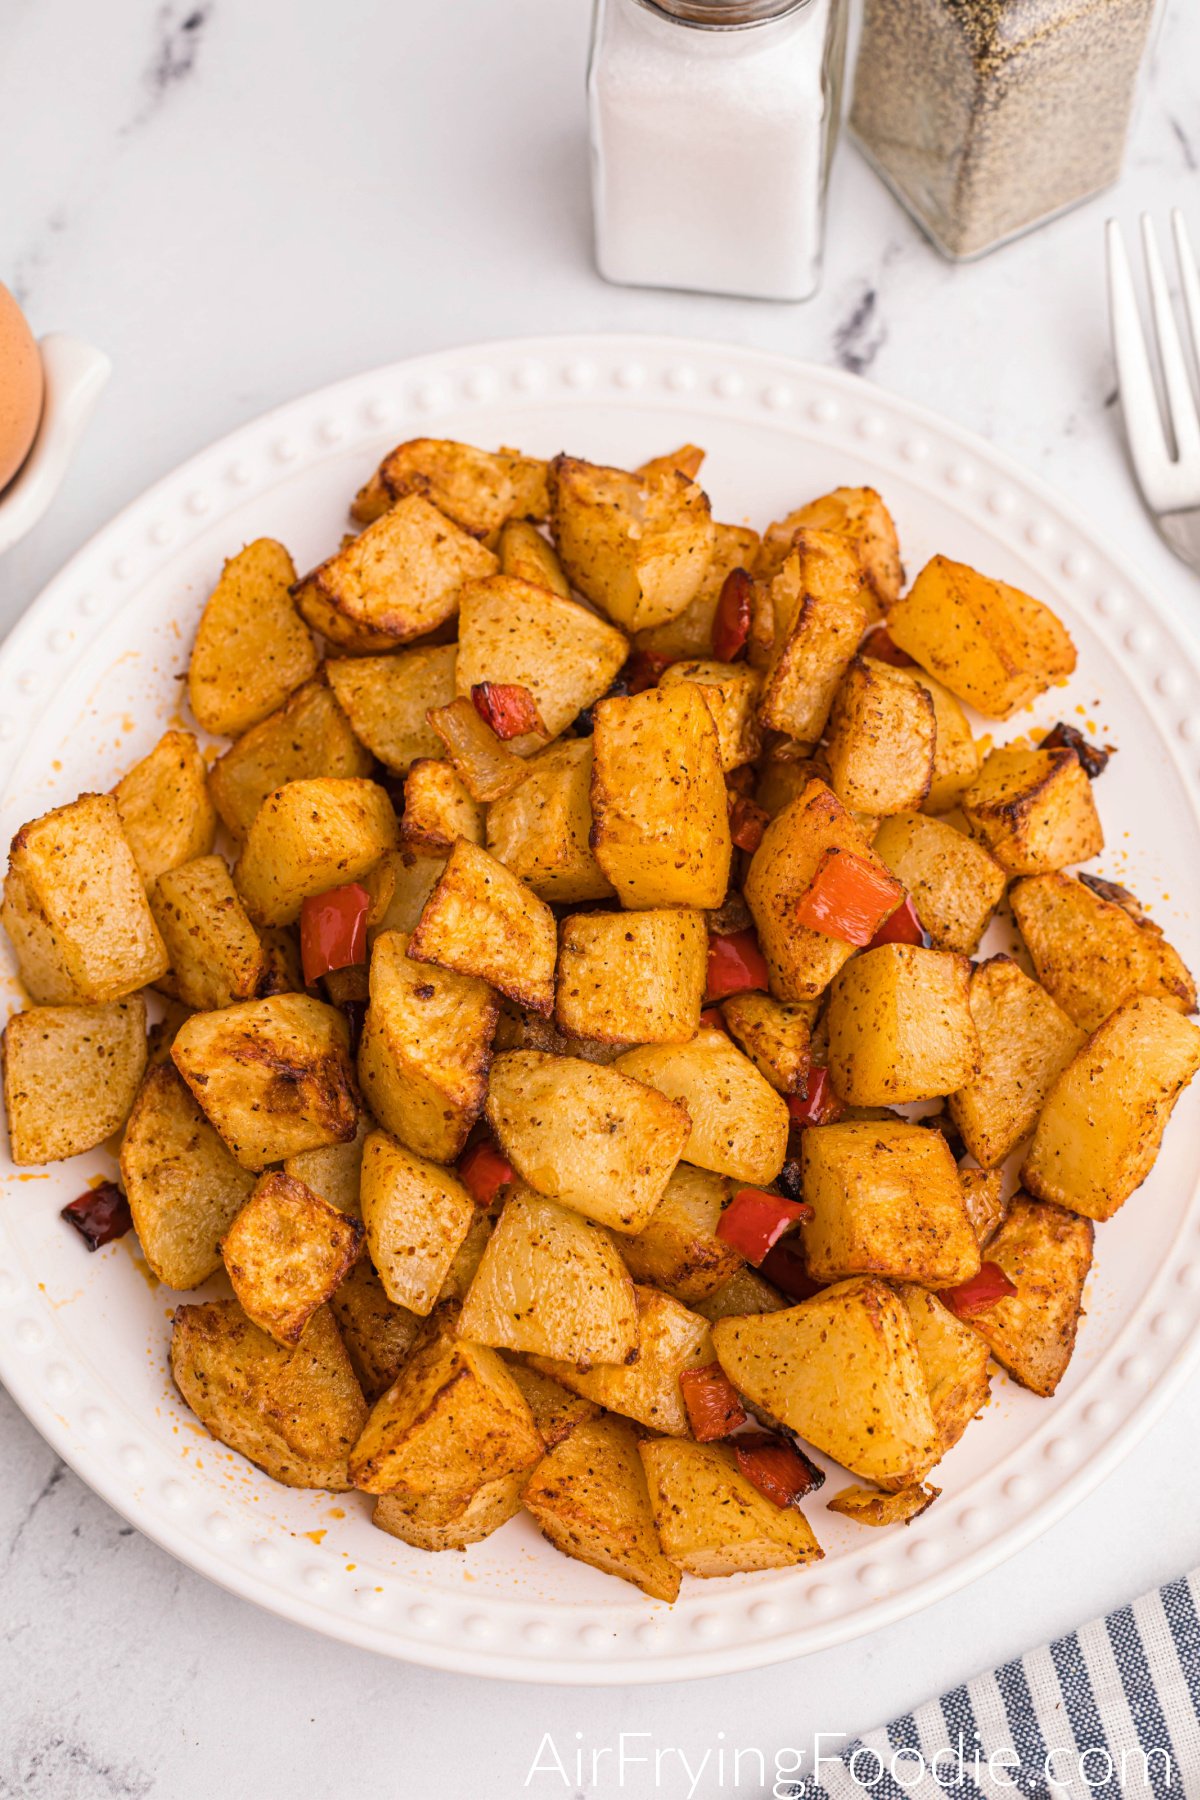 Air fried home fries on a white plate, ready to serve.